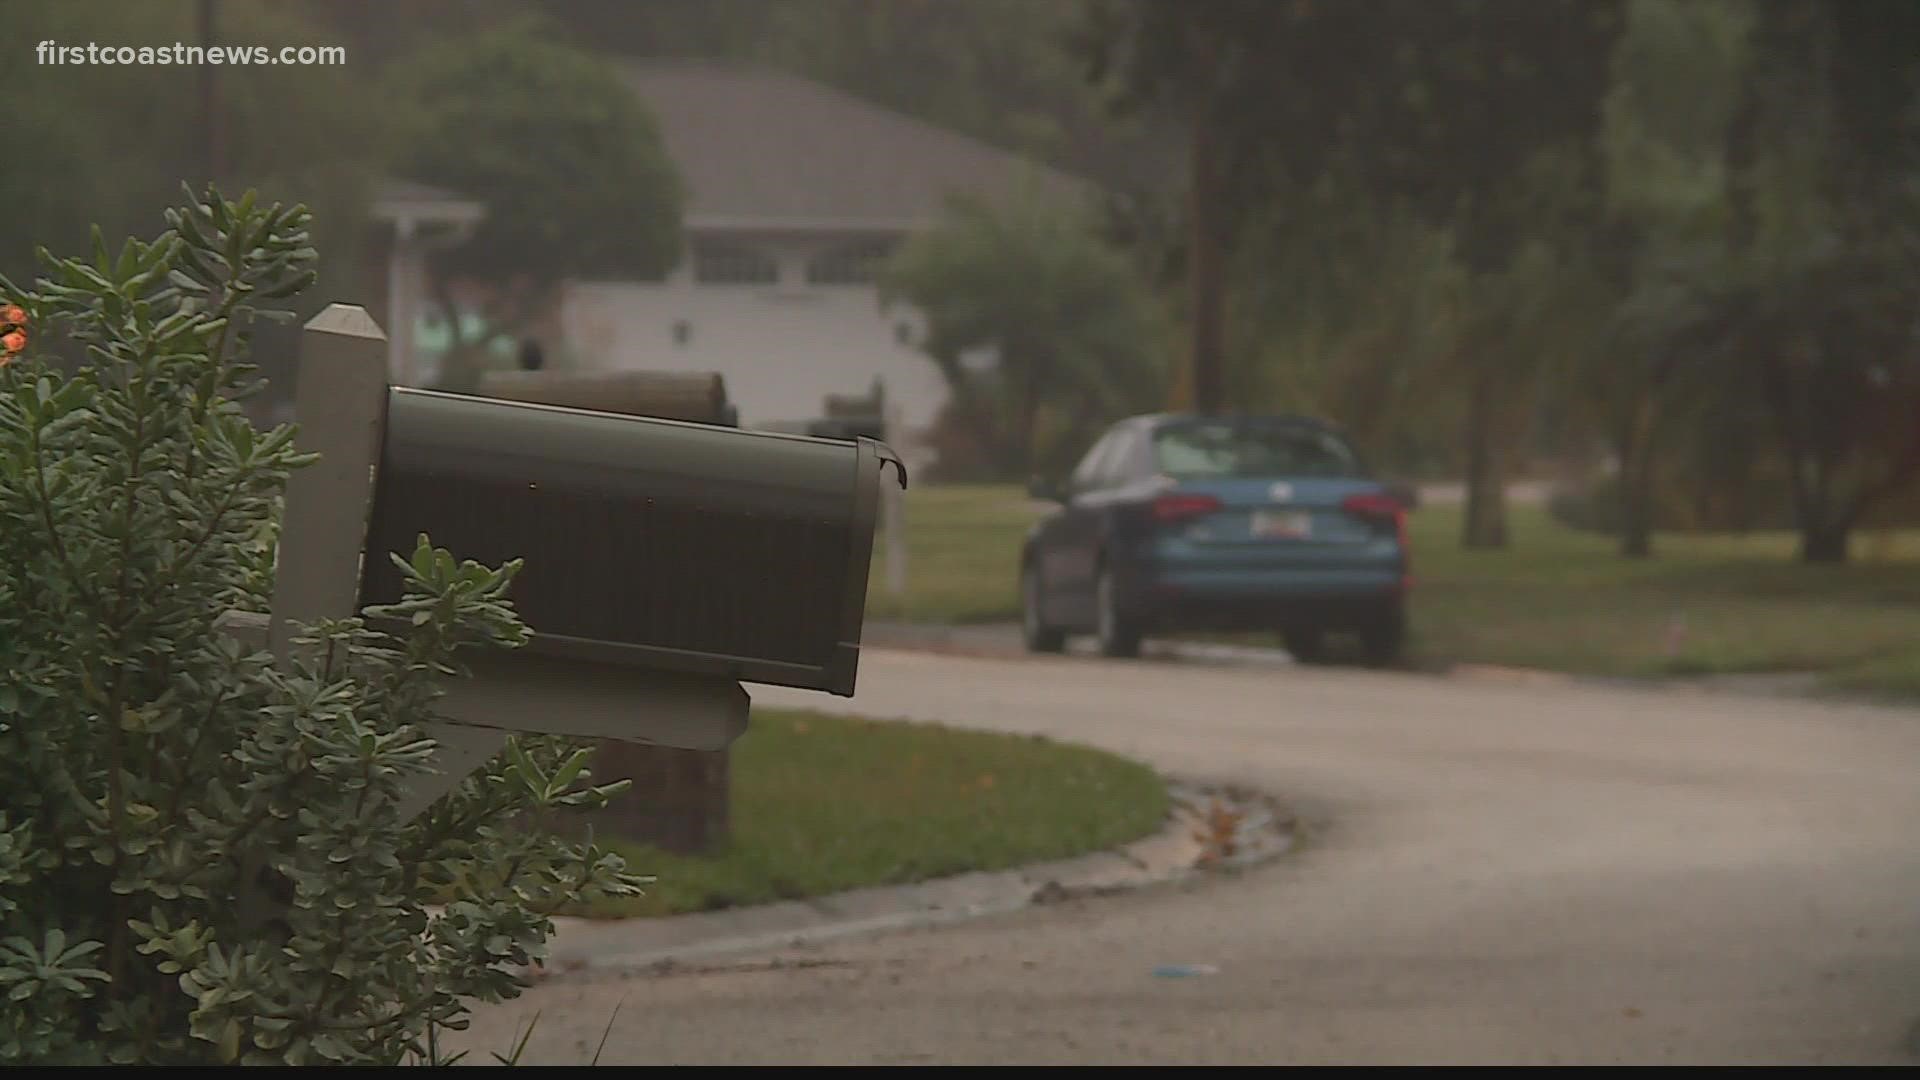 JSO reports about $35,000 worth of property was stolen from the home including cash, credit cards and jewelry.